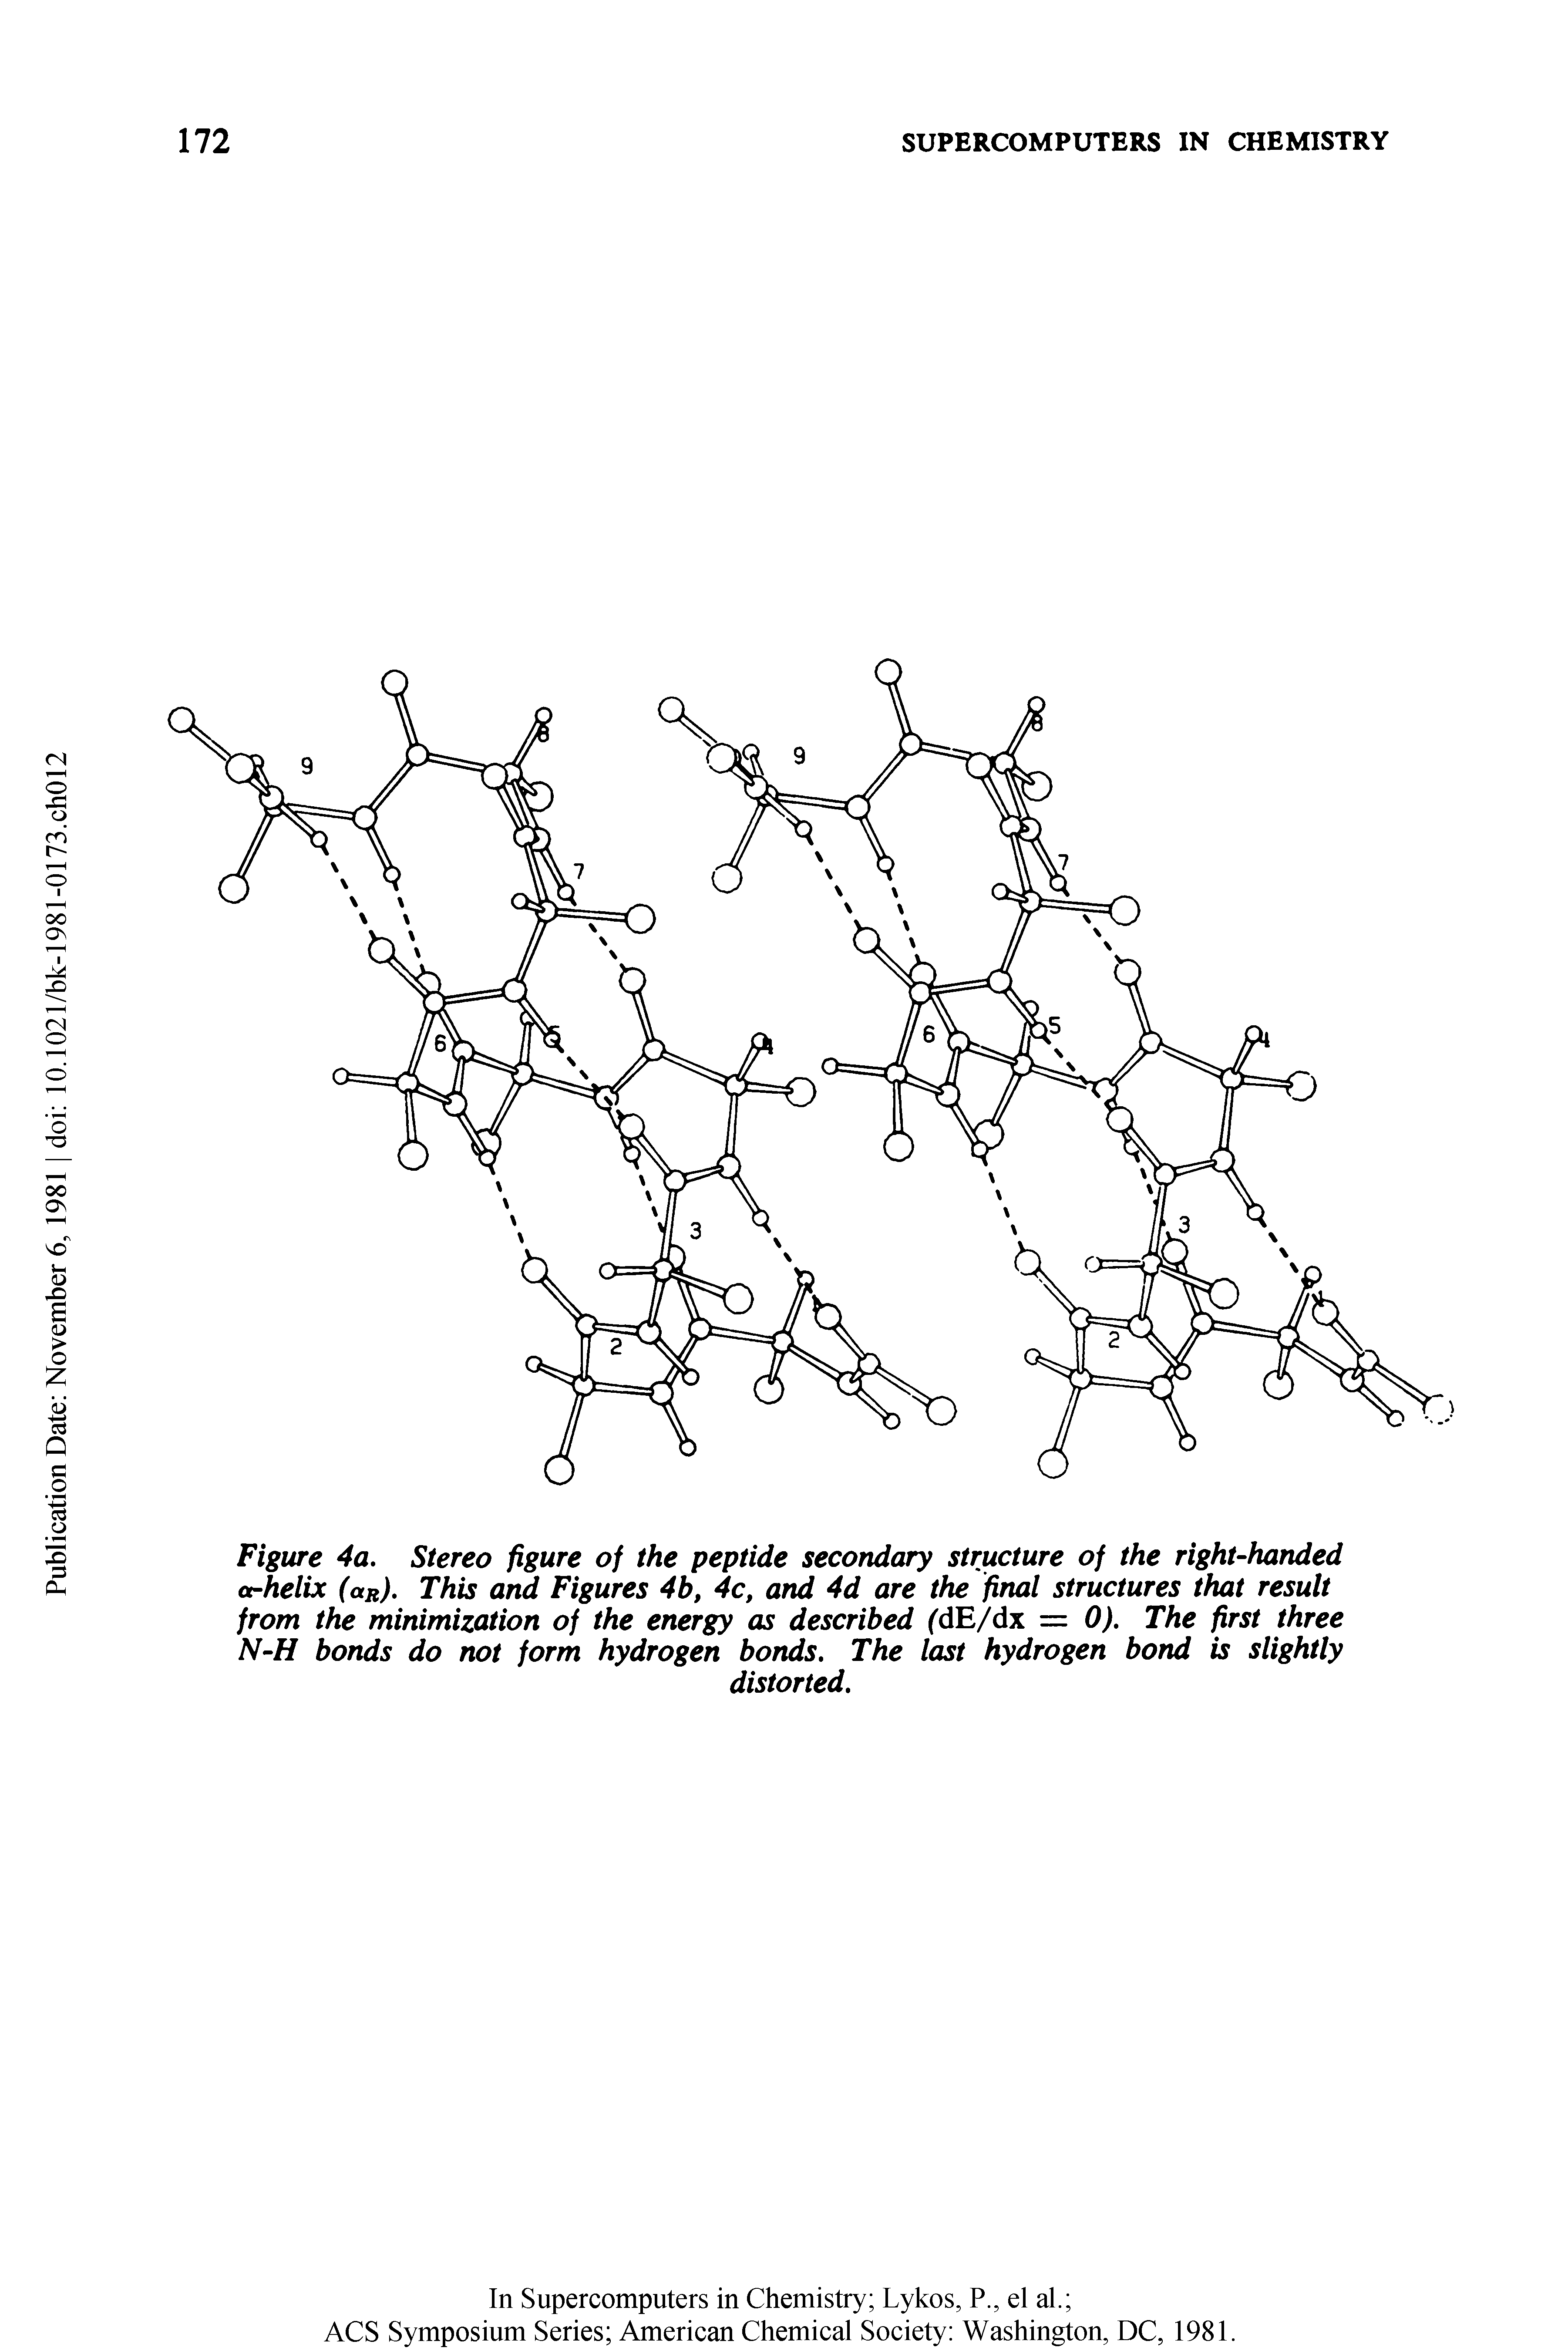 Figure 4a. Stereo figure of the peptide secondary structure of the right-handed ct-helix (aR). This and Figures 4b, 4c, and 4d are the final structures that result from the minimization of the energy as described (dE/dx = 0). The first three N-H bonds do not form hydrogen bonds. The last hydrogen bond is slightly...